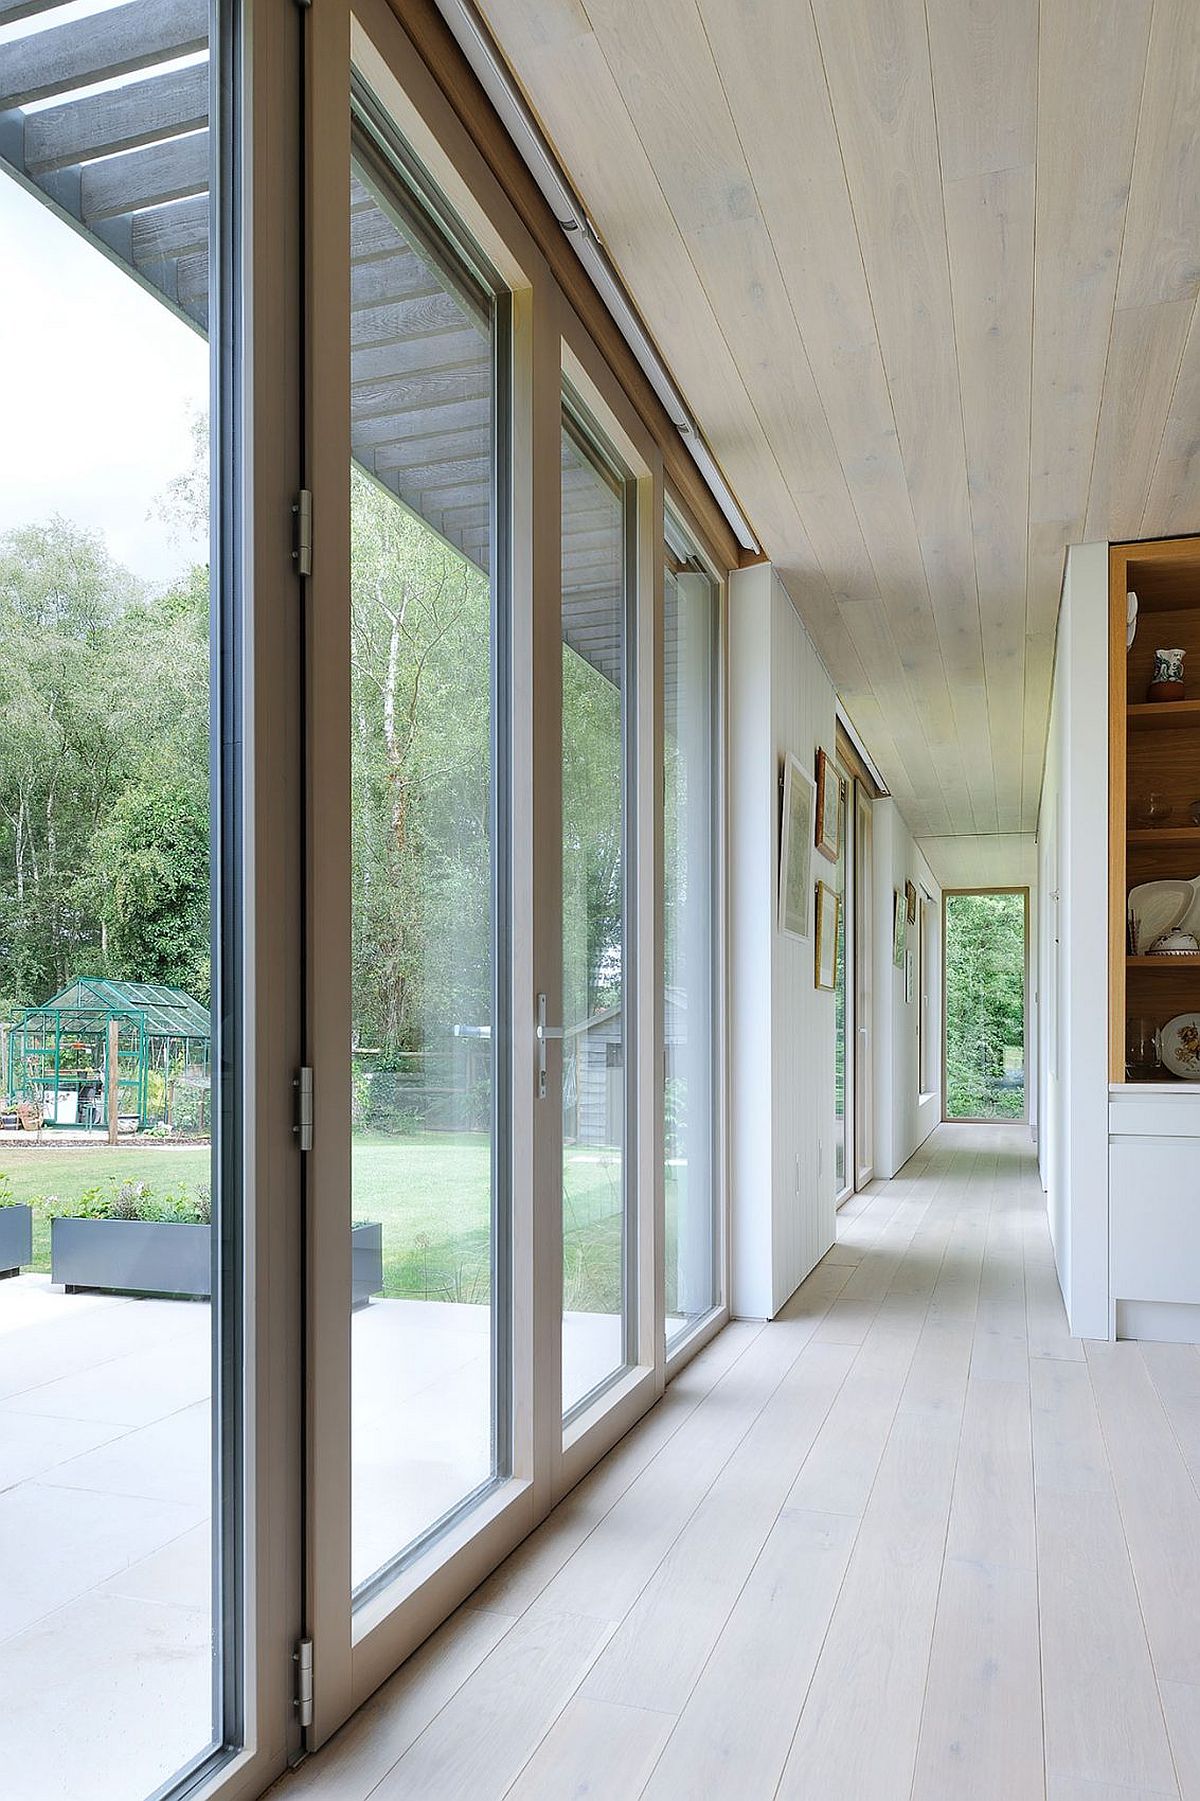 Series of glass doors connects the indoors with the deck outside